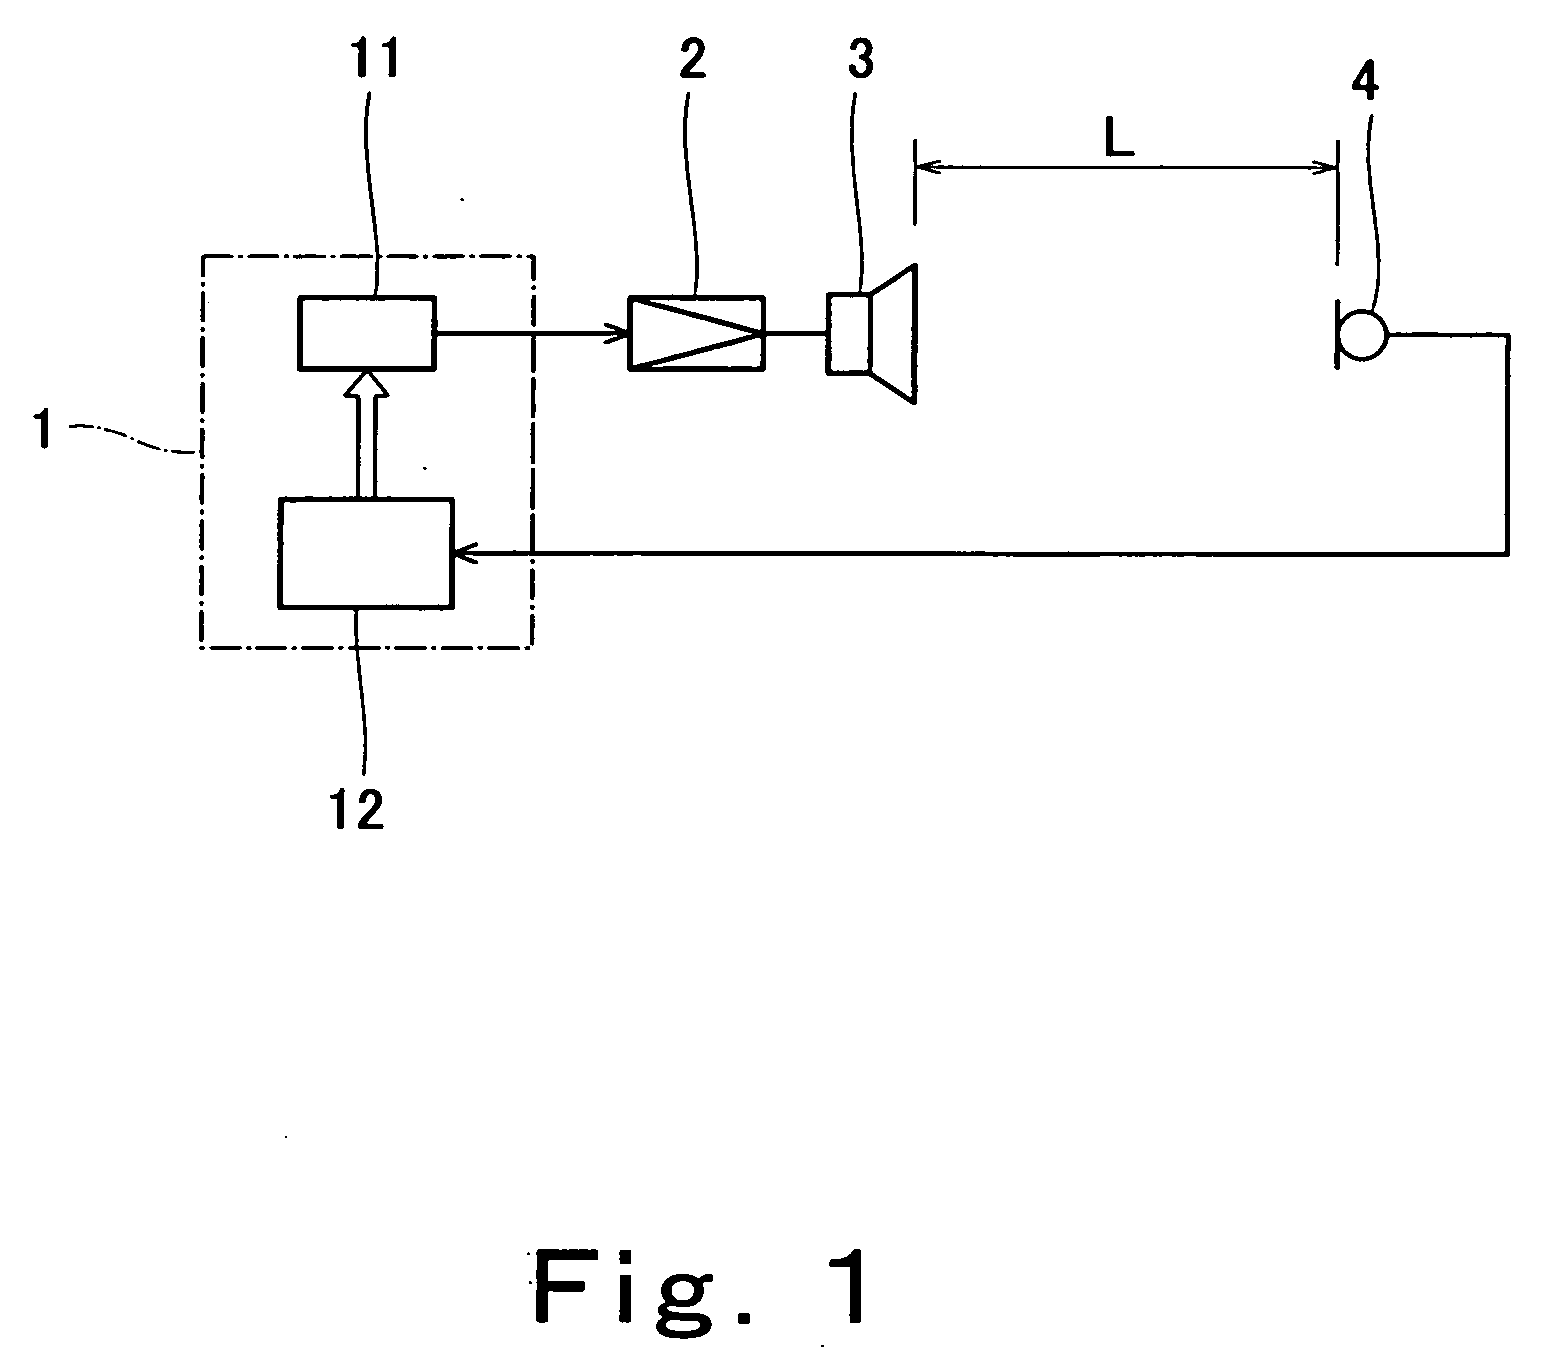 Method and device for measuring sound wave propagation time between loudspeaker and microphone